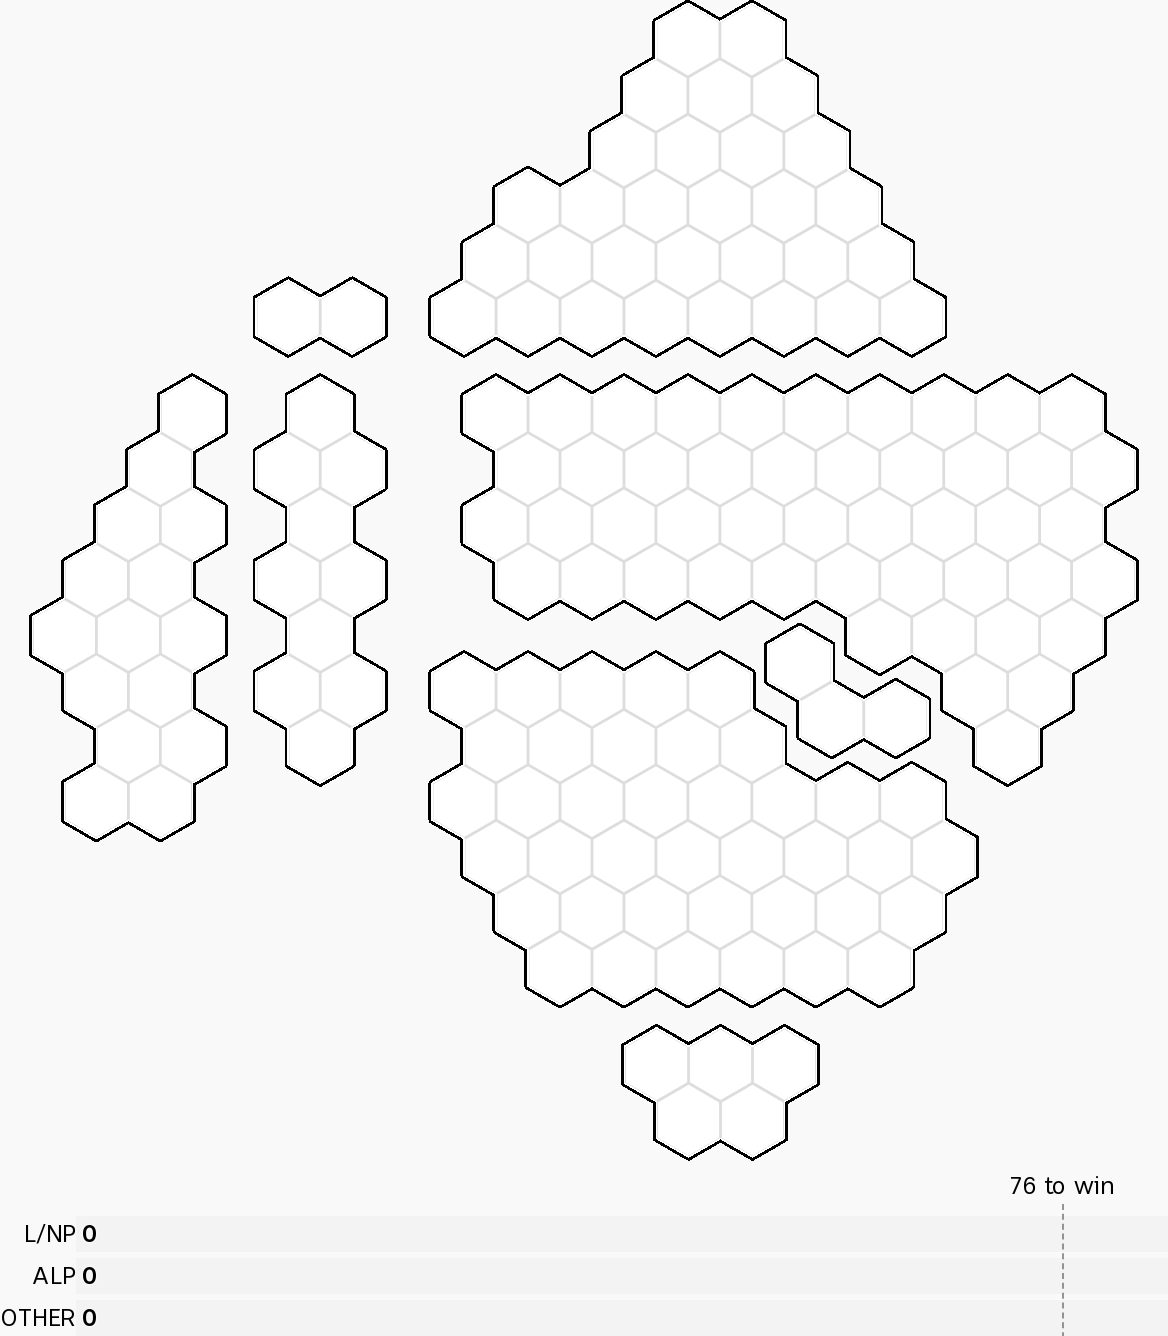 A map of Australia with each seat divided into hexagons.